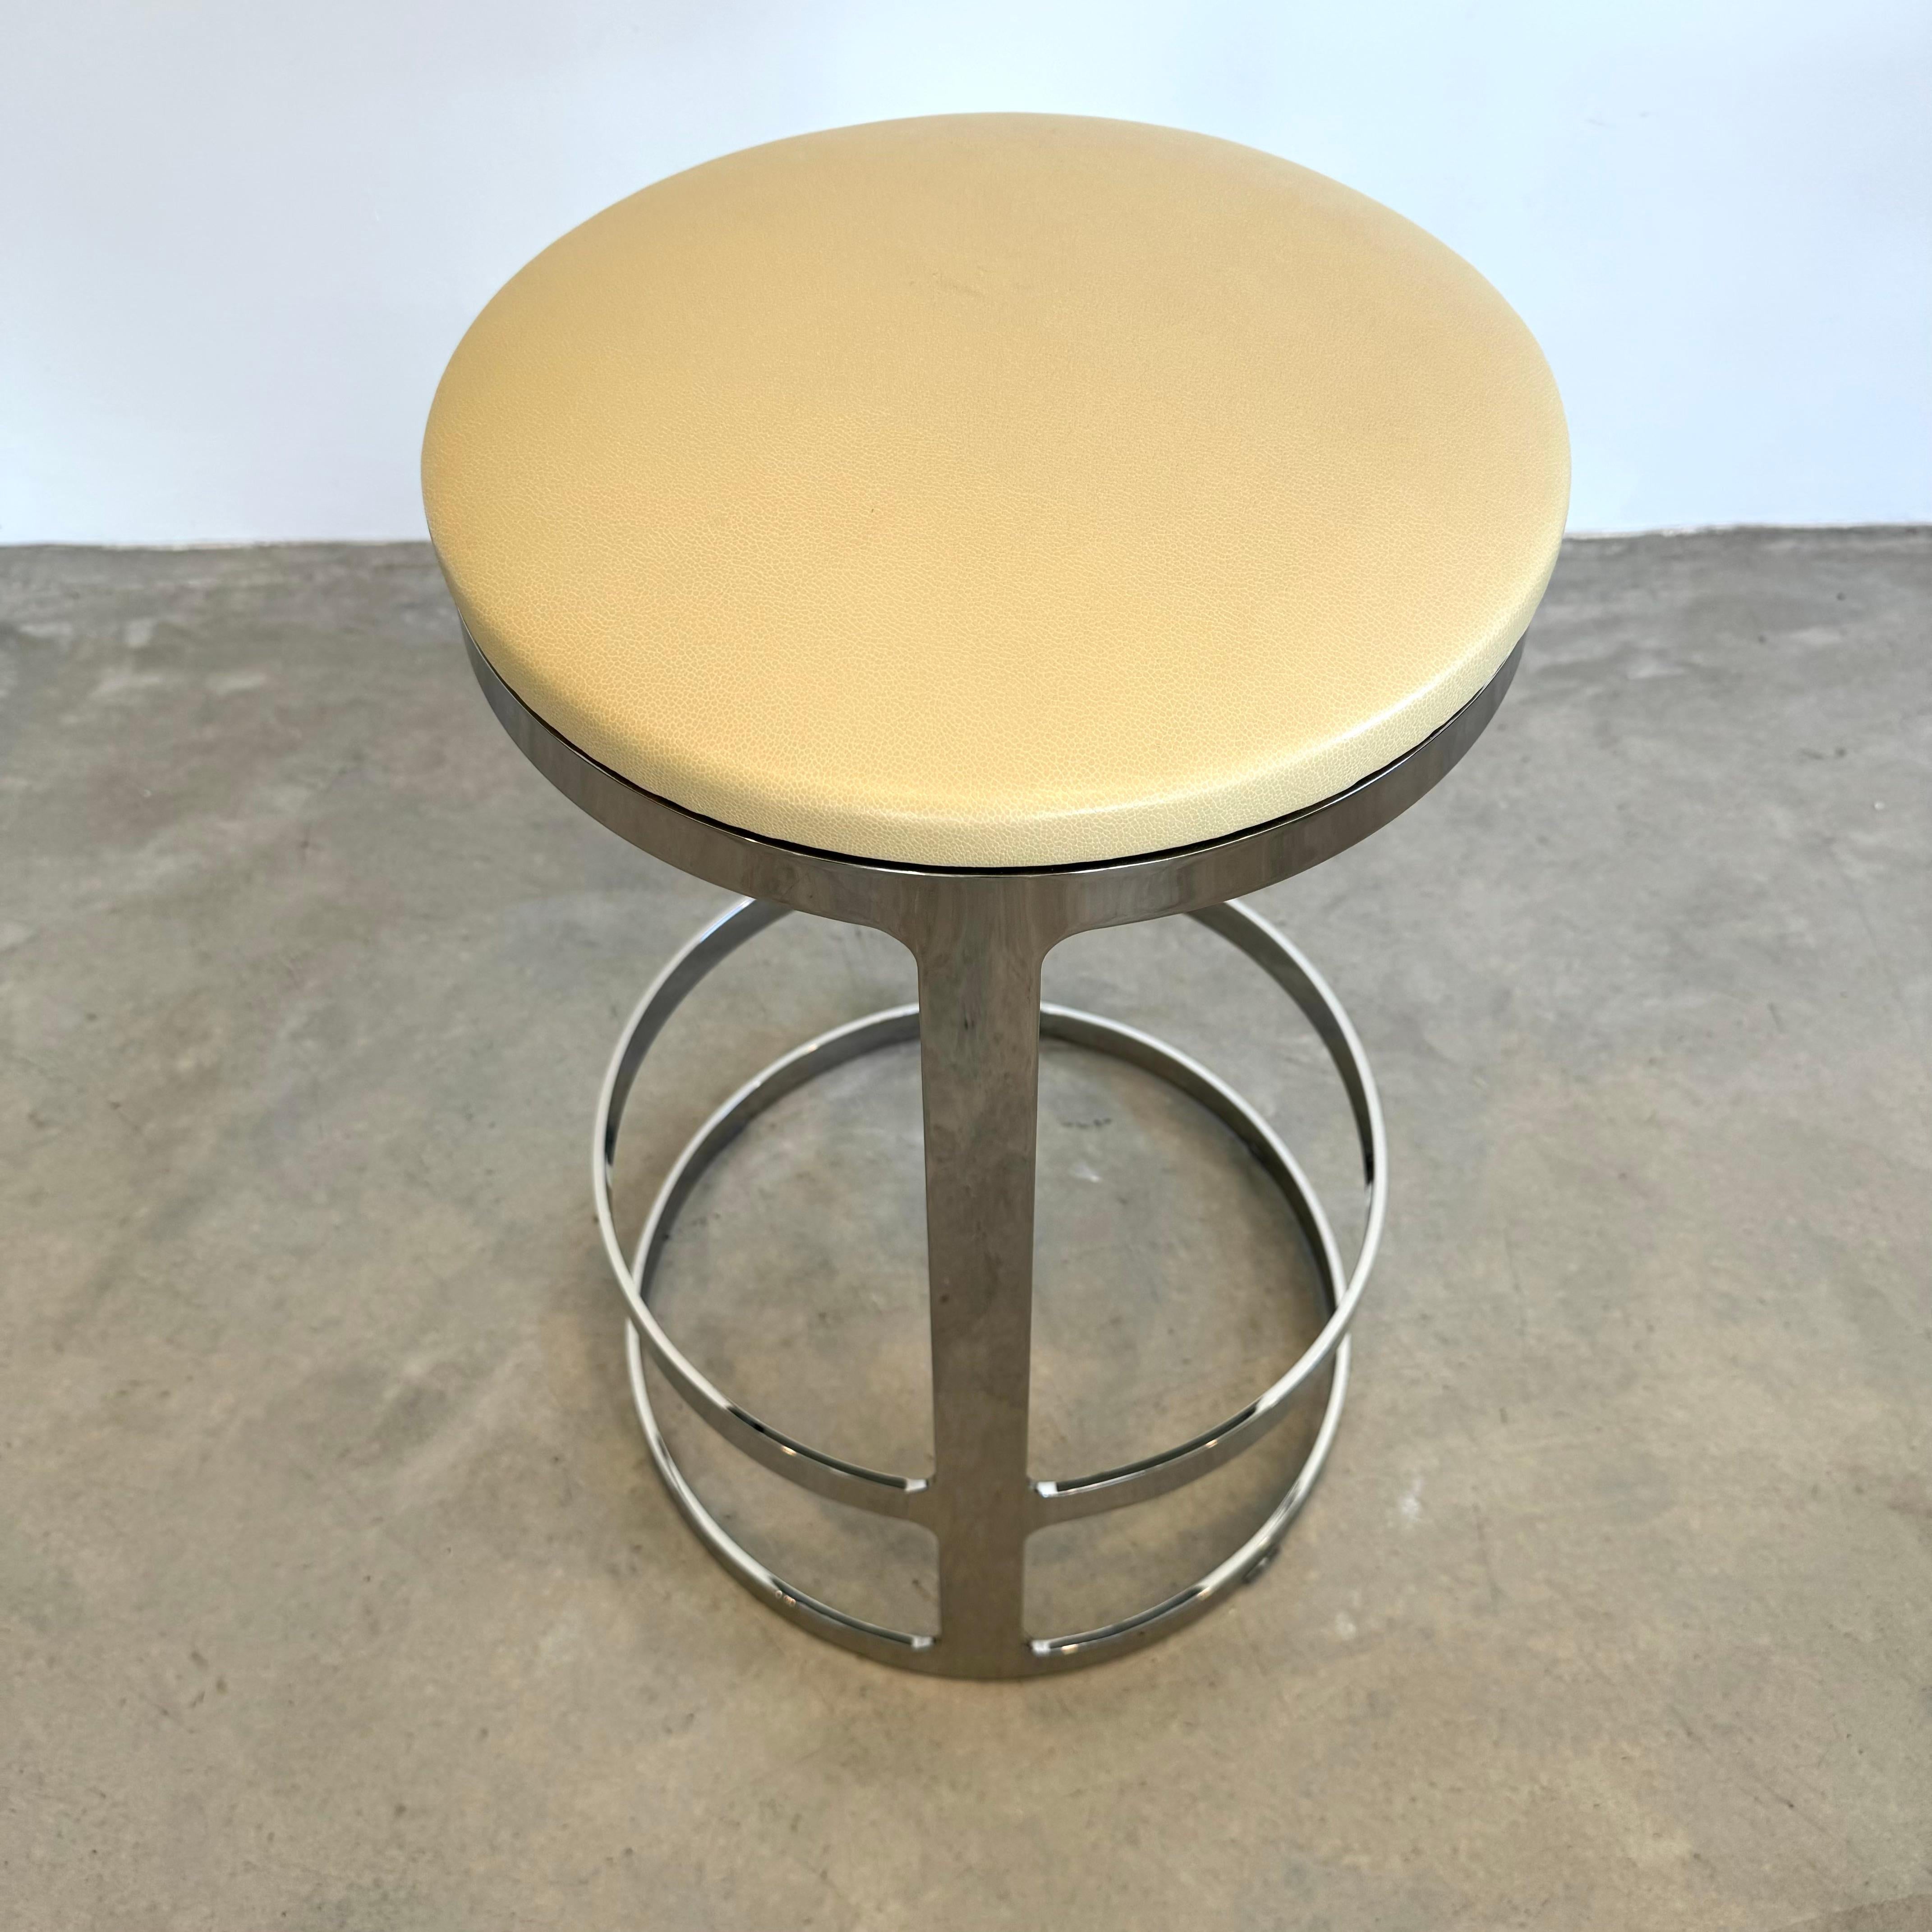 Set of Three Polished Steel and Leather Swivel Counter Stools, 2000s USA For Sale 2